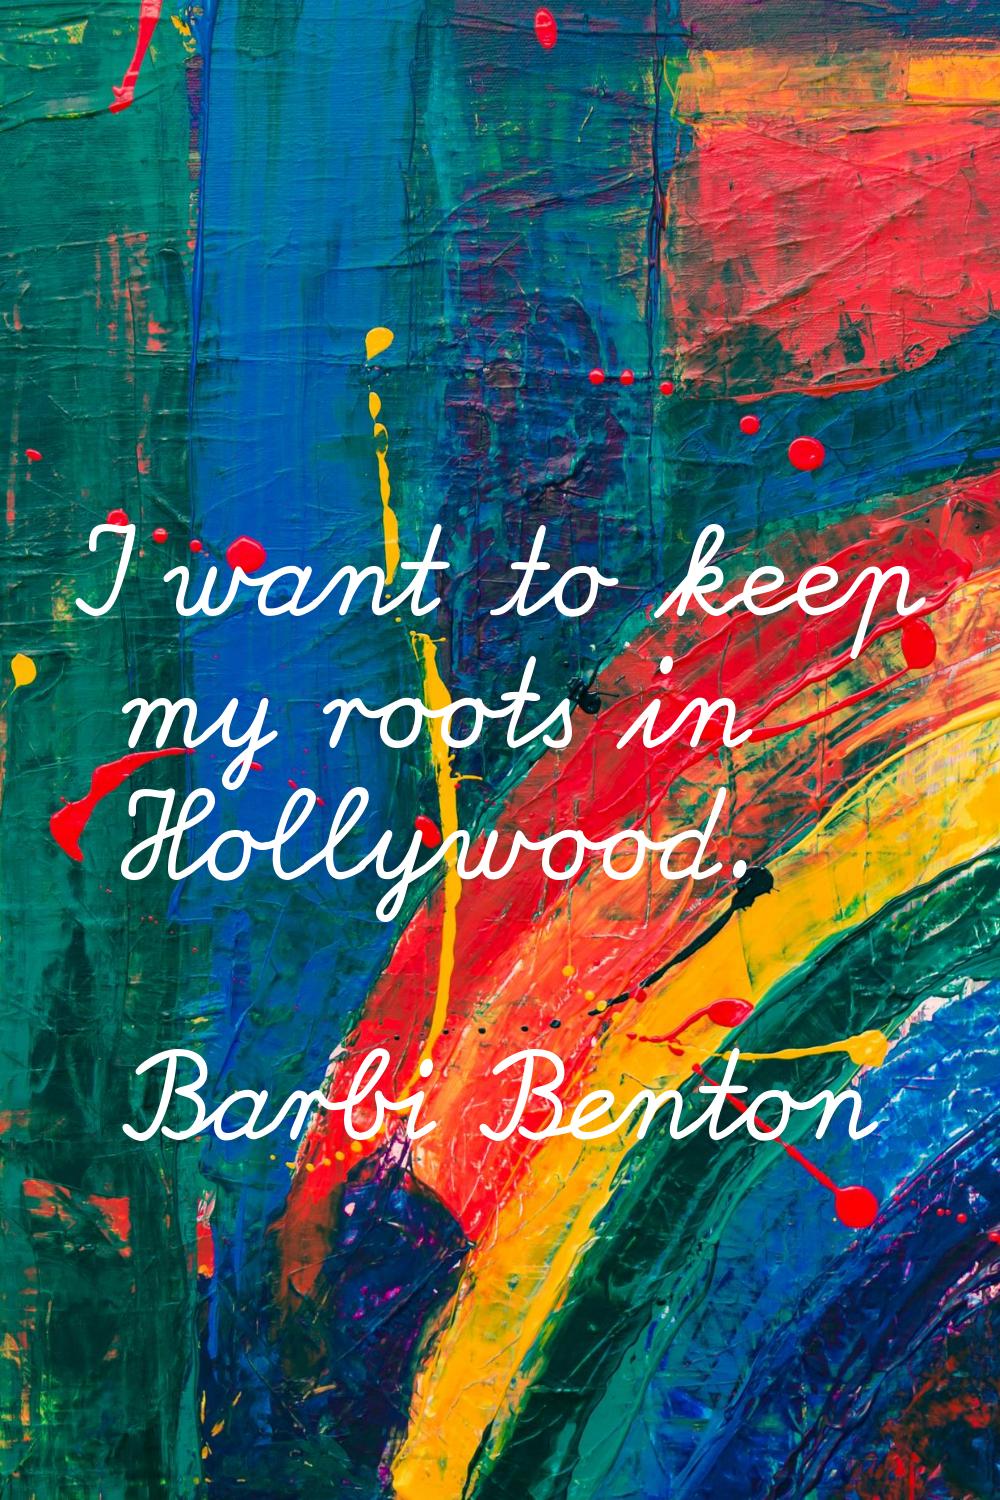 I want to keep my roots in Hollywood.